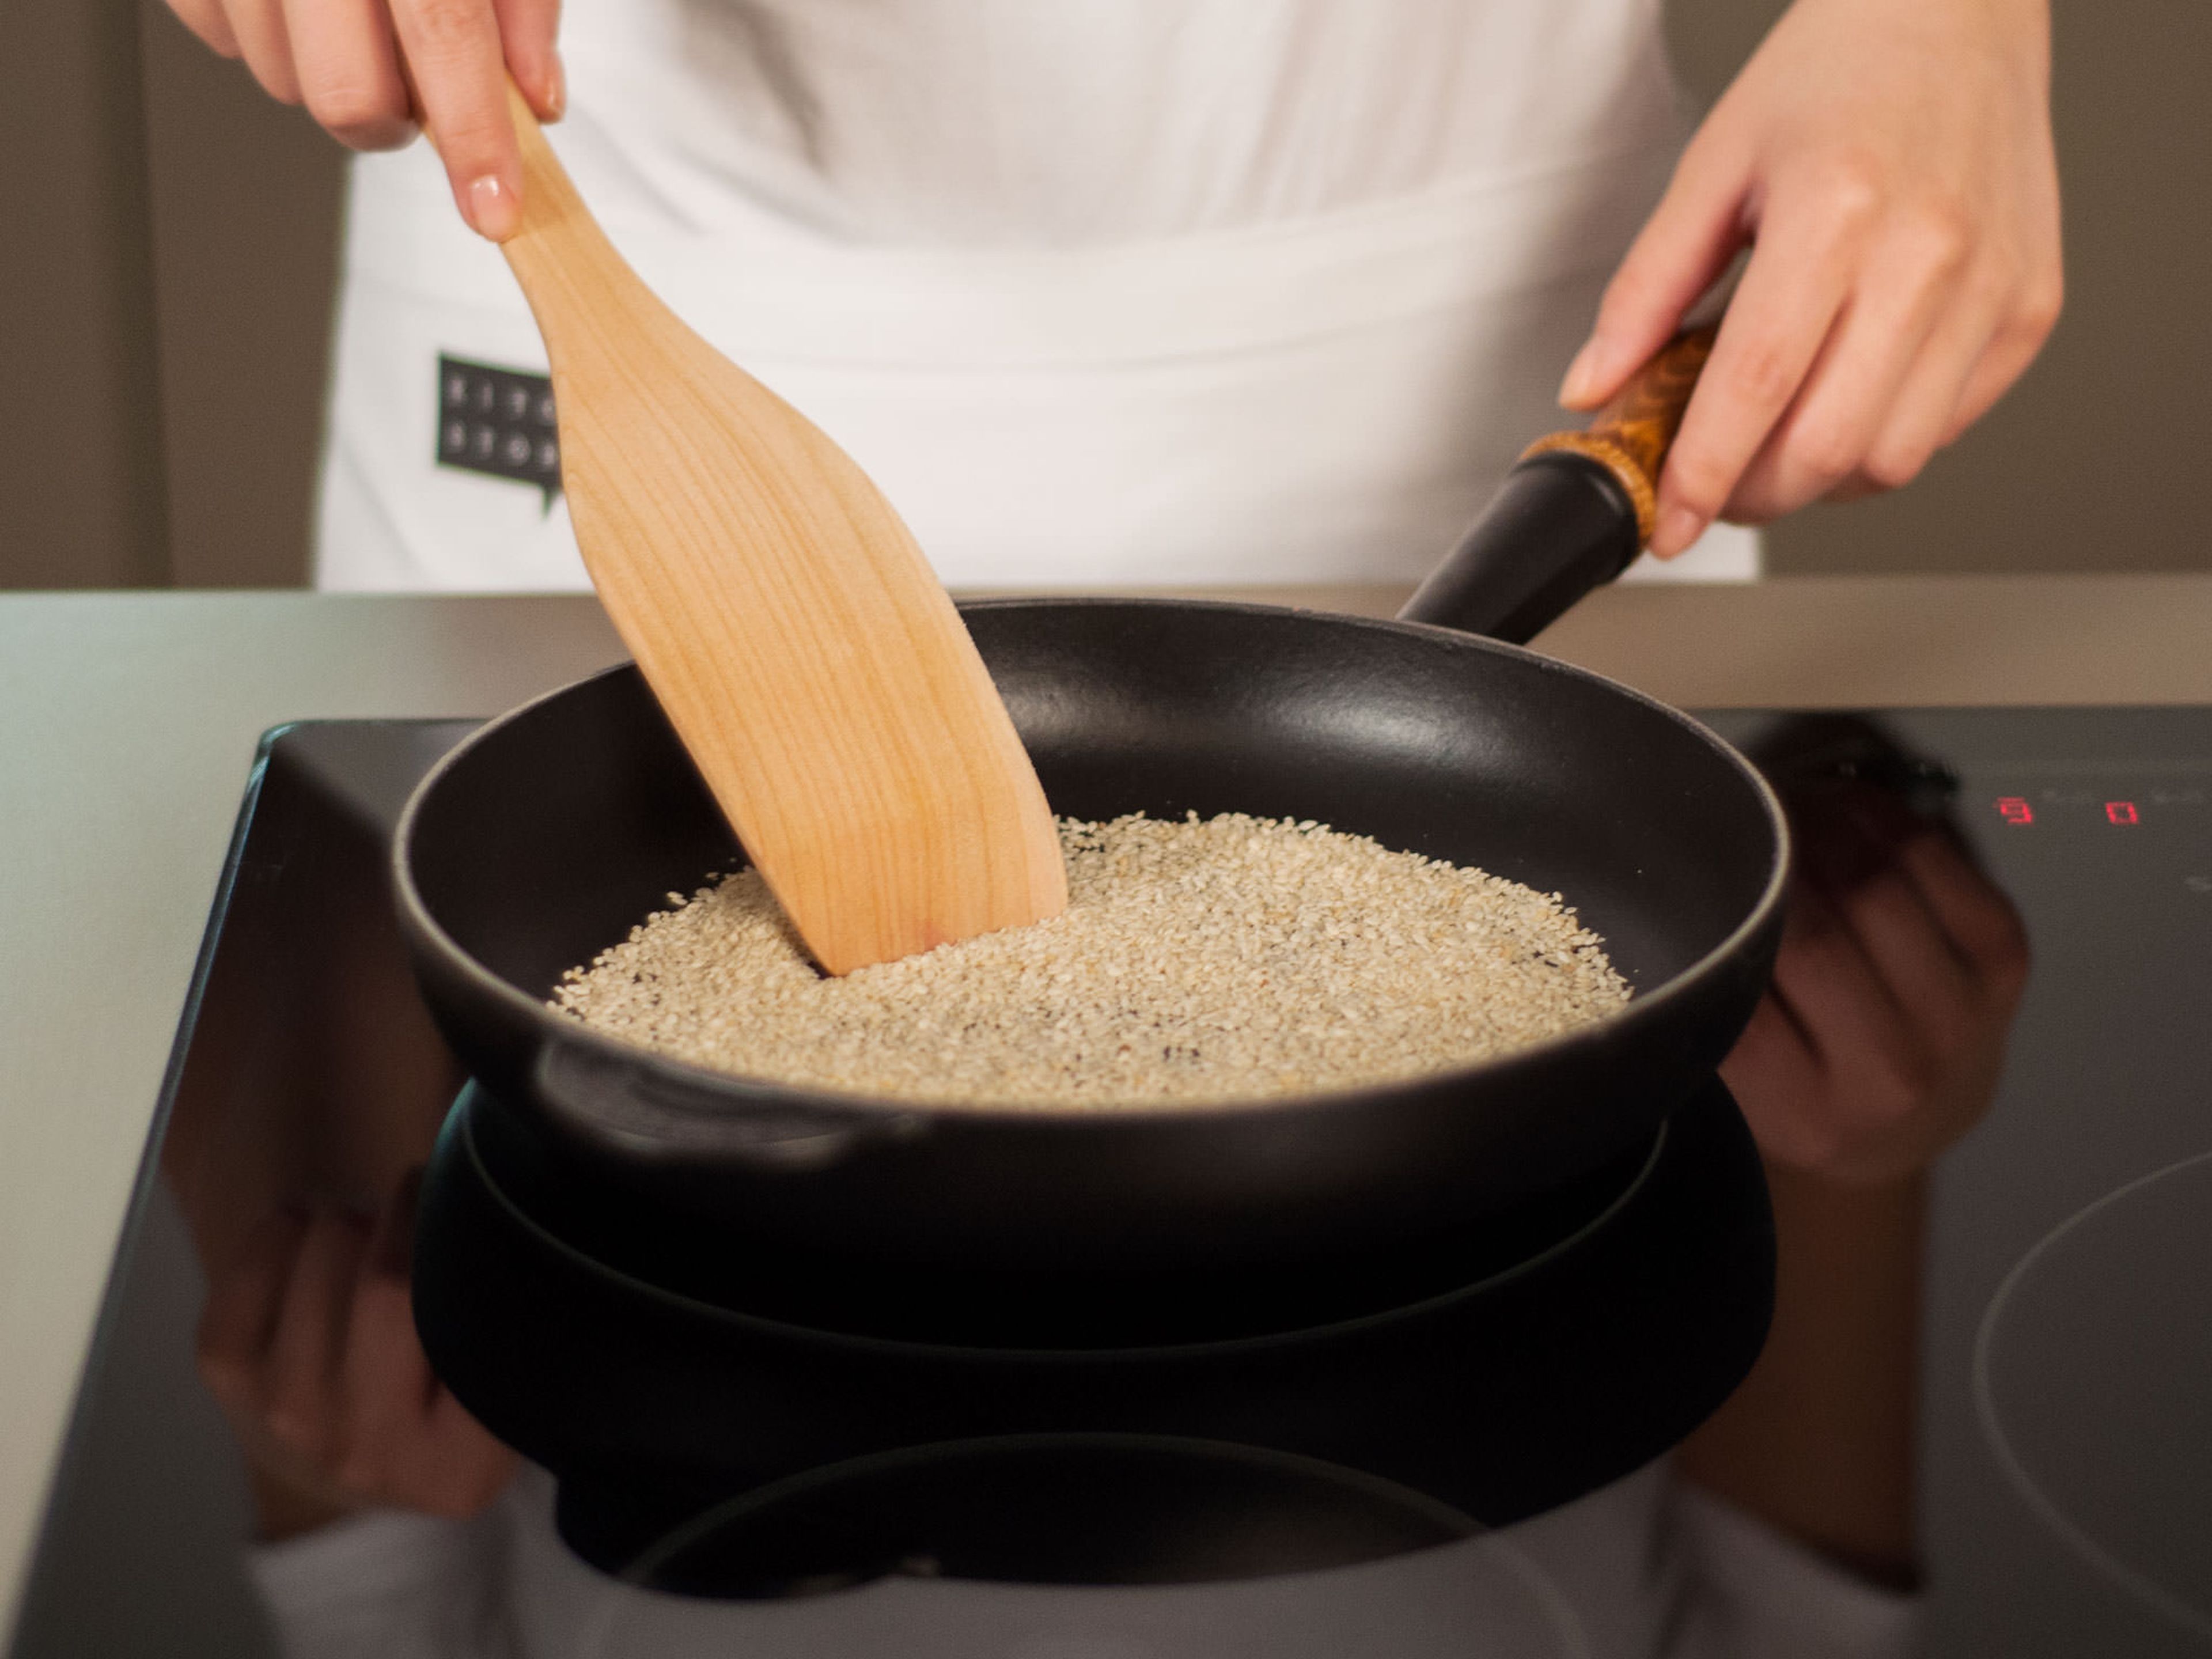 Toast sesame seeds in a frying pan over low-medium heat for approx. 3 – 4 min. until fragrant and golden.